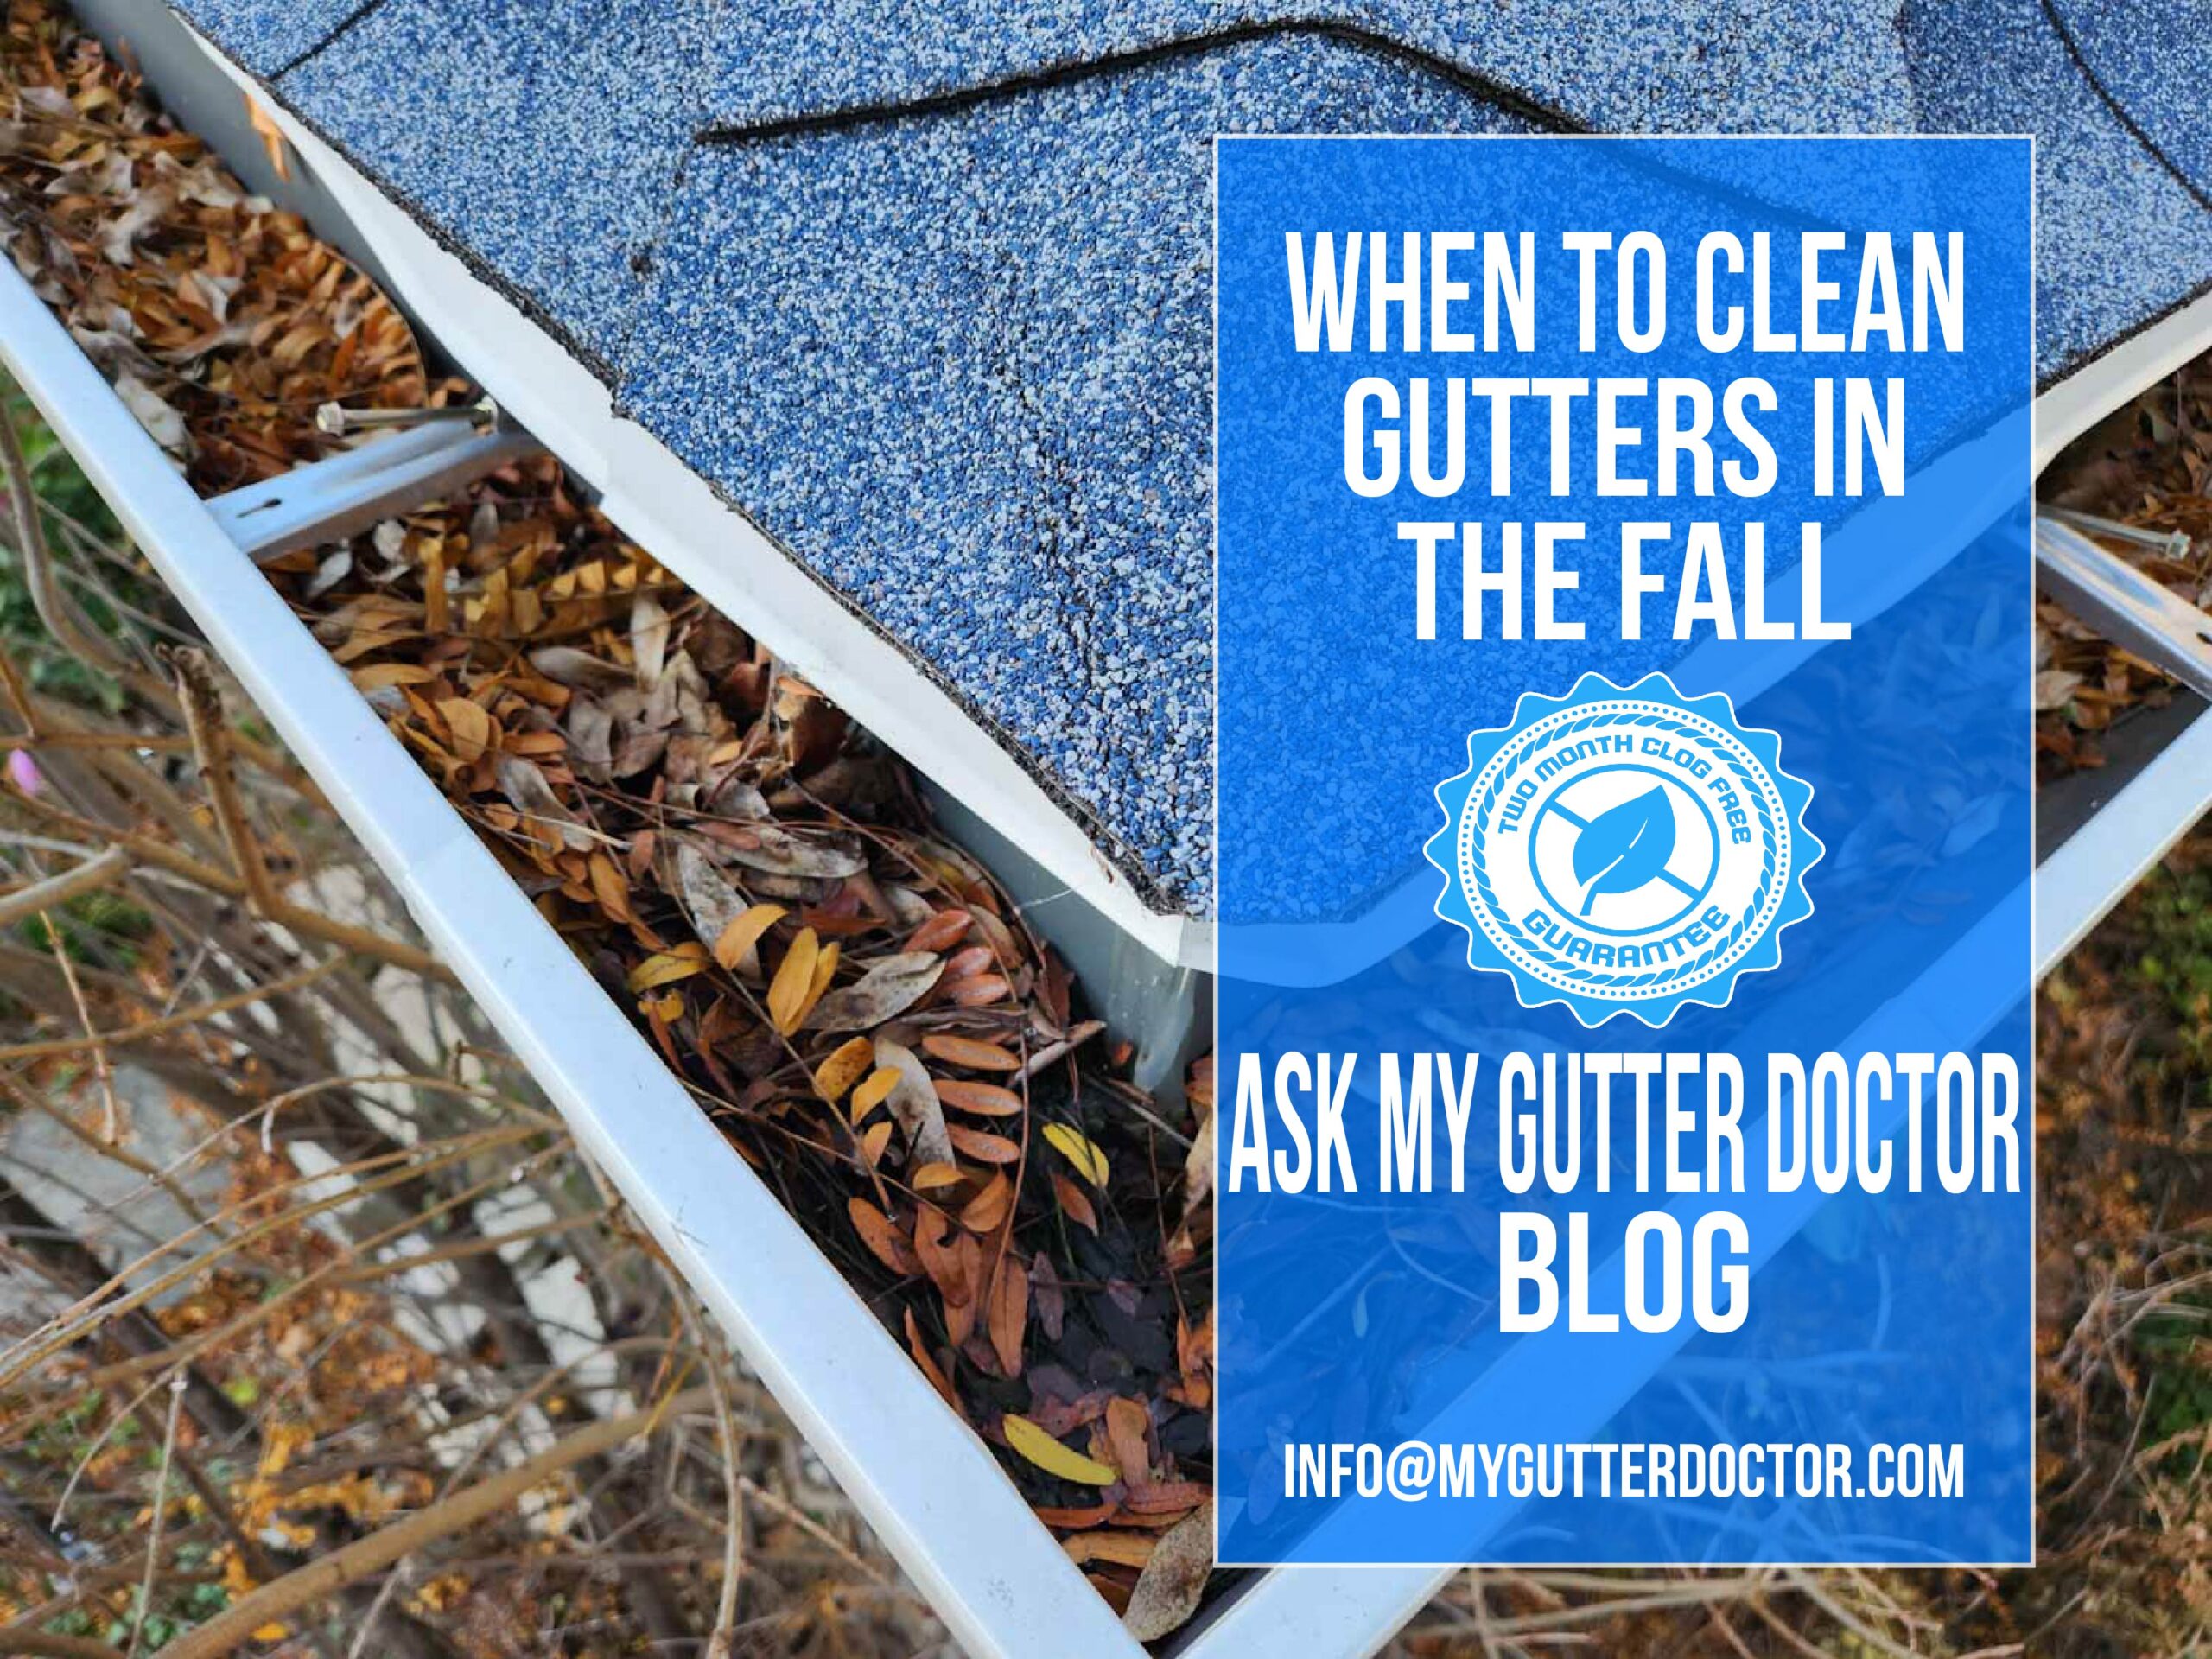 when to clean gutters in fall